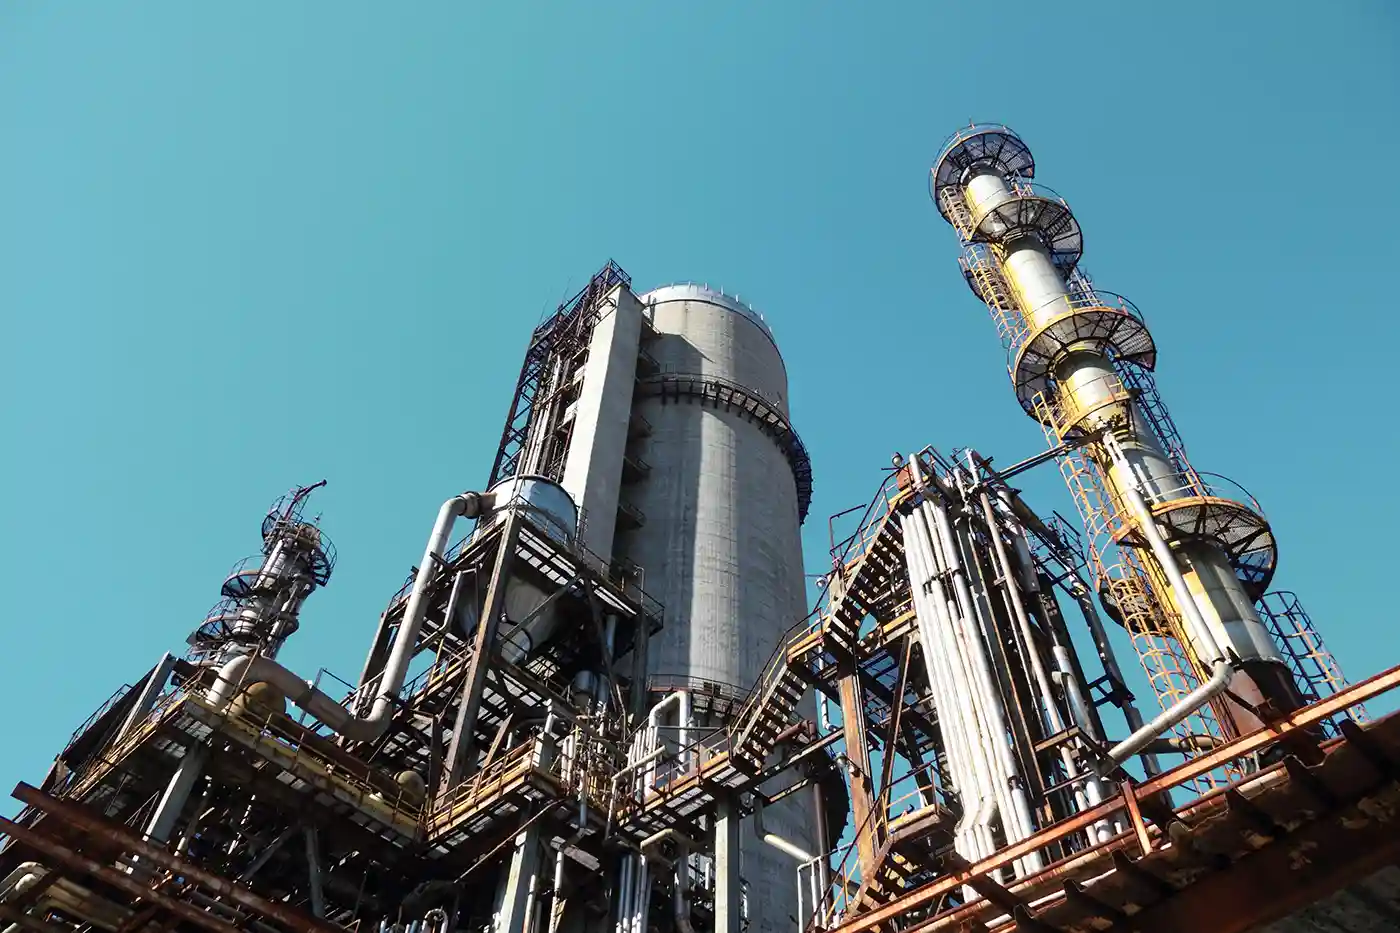 Photo of an industrial plant with tall towers and pipes against a clear blue sky